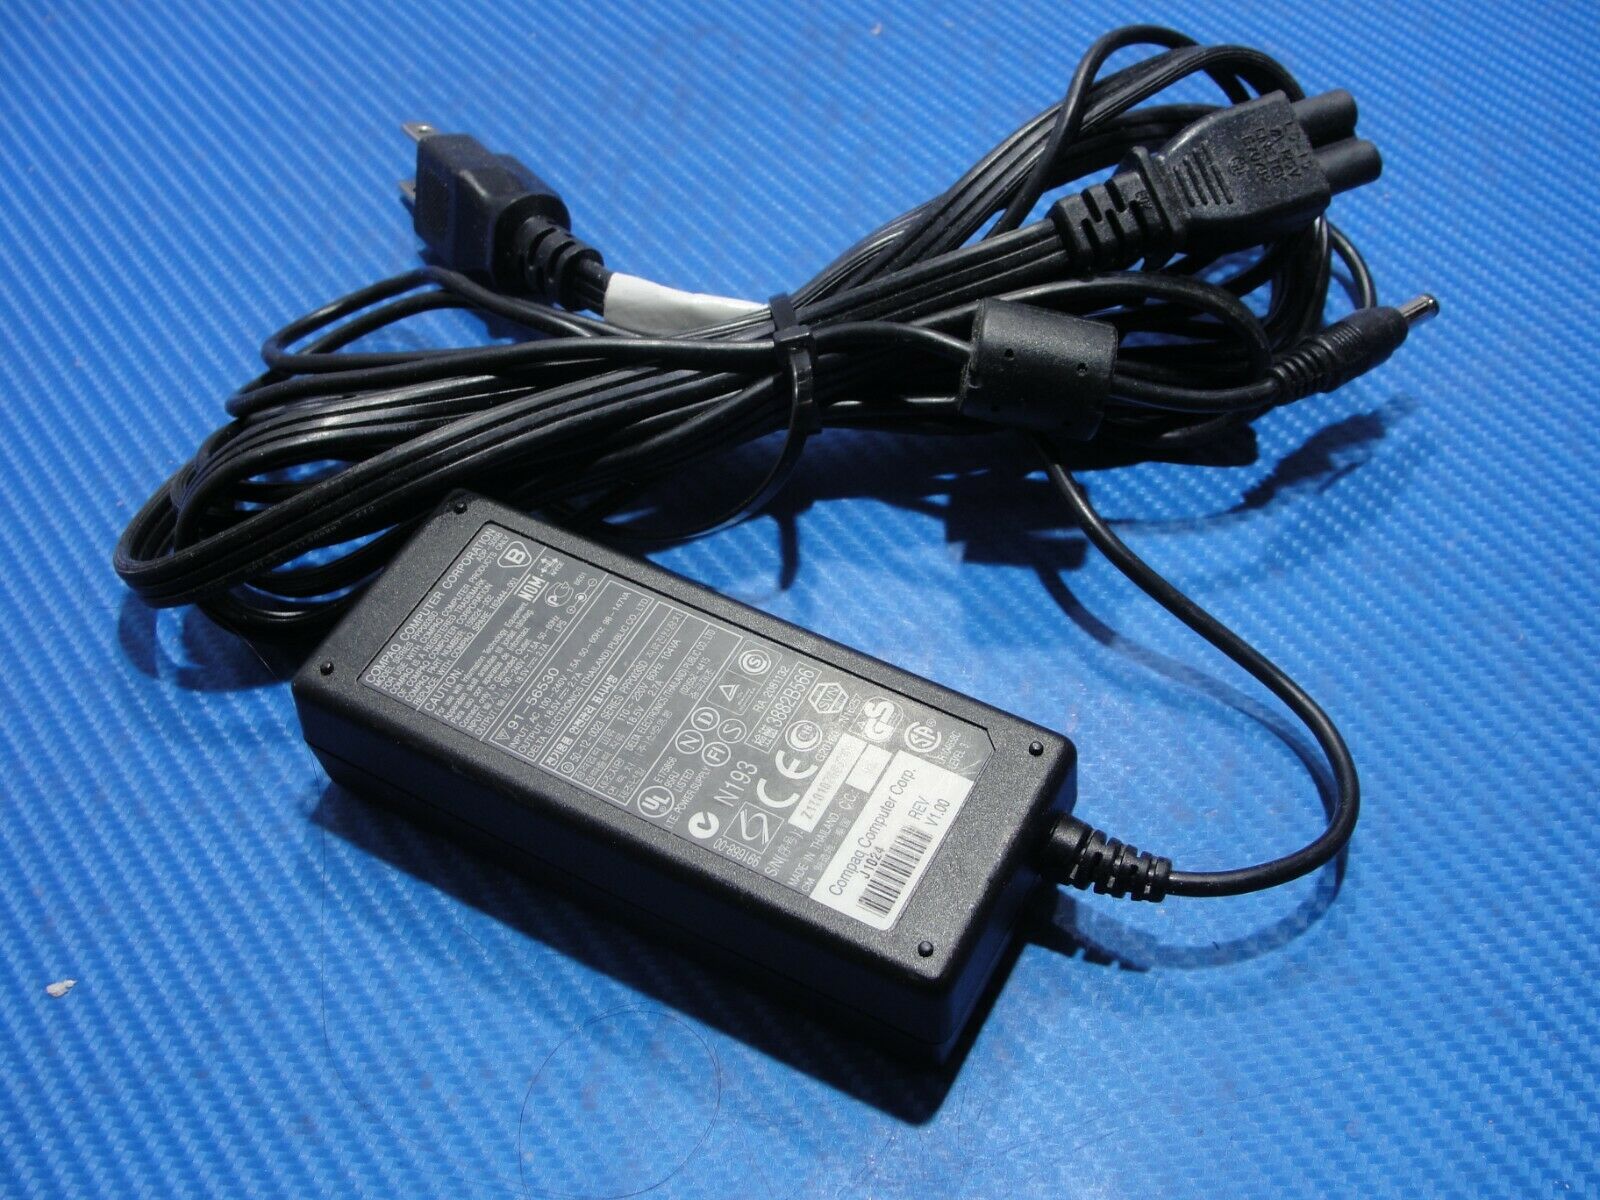 Genuine Compaq OEM AC Adapter Power Charger 18.5V 2.7A 65W 163444-001 159224-002 - Laptop Parts - Buy Authentic Computer Parts - Top Seller Ebay